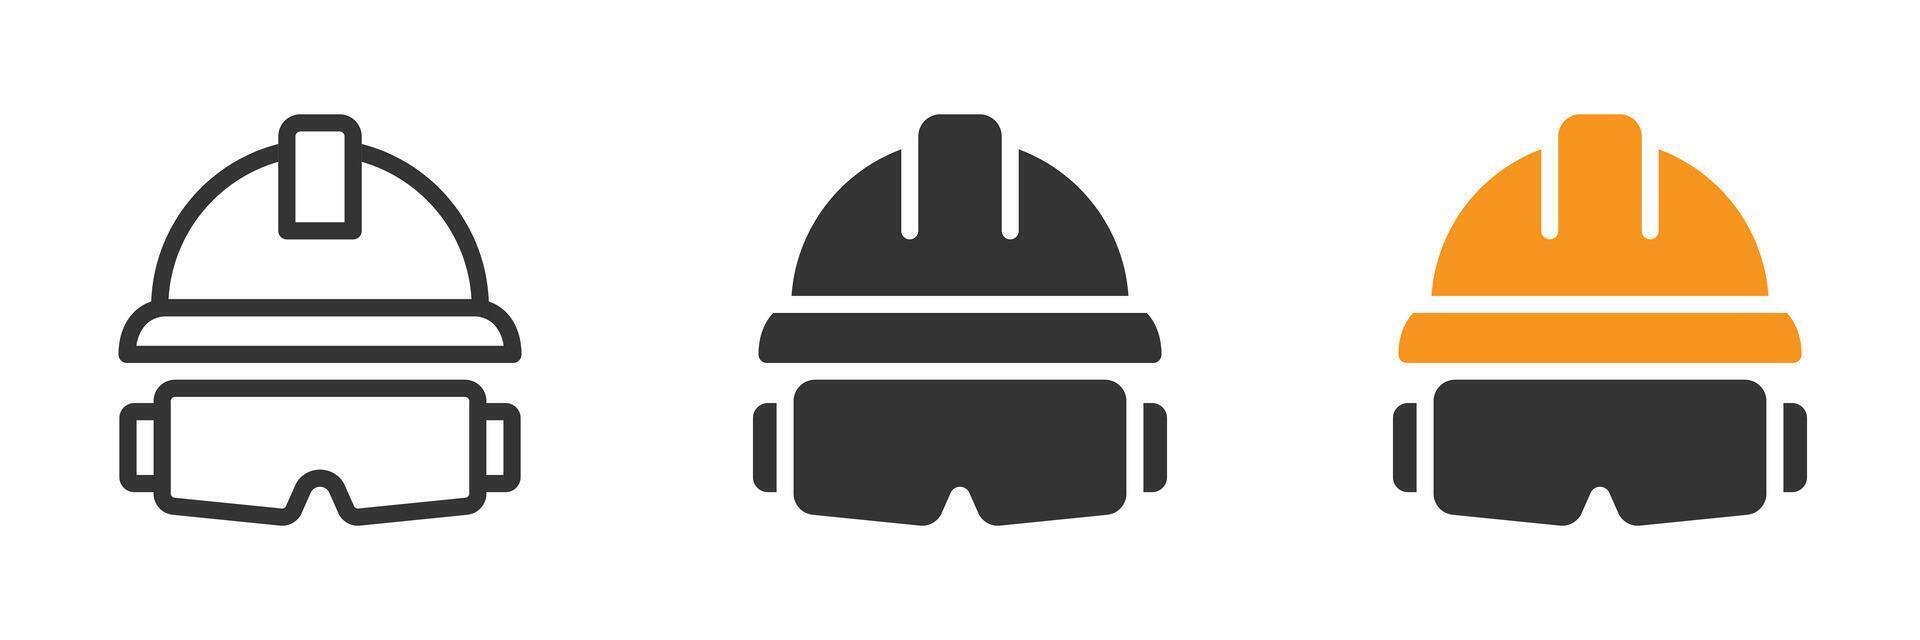 Protection glasses and hardhat icon. Vector illustration.